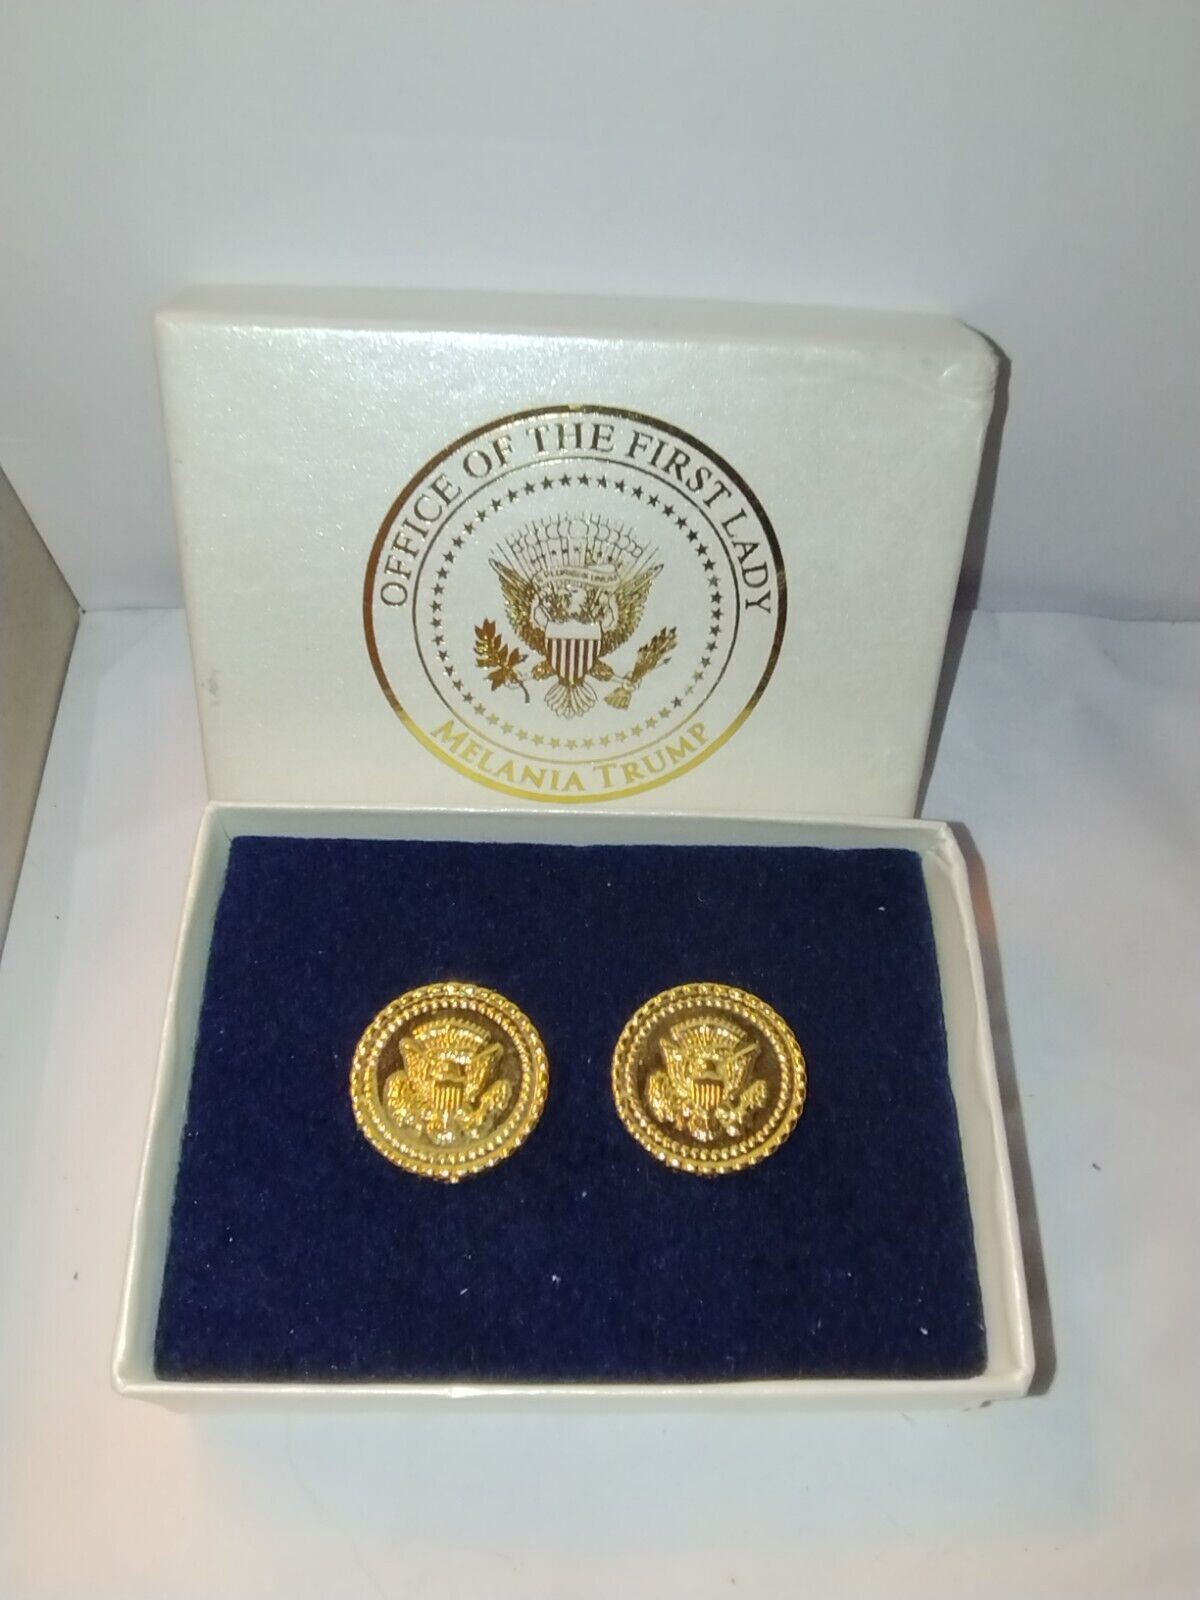 First Lady Melania Trump Official White House, cufflinks gold tone signed. new.